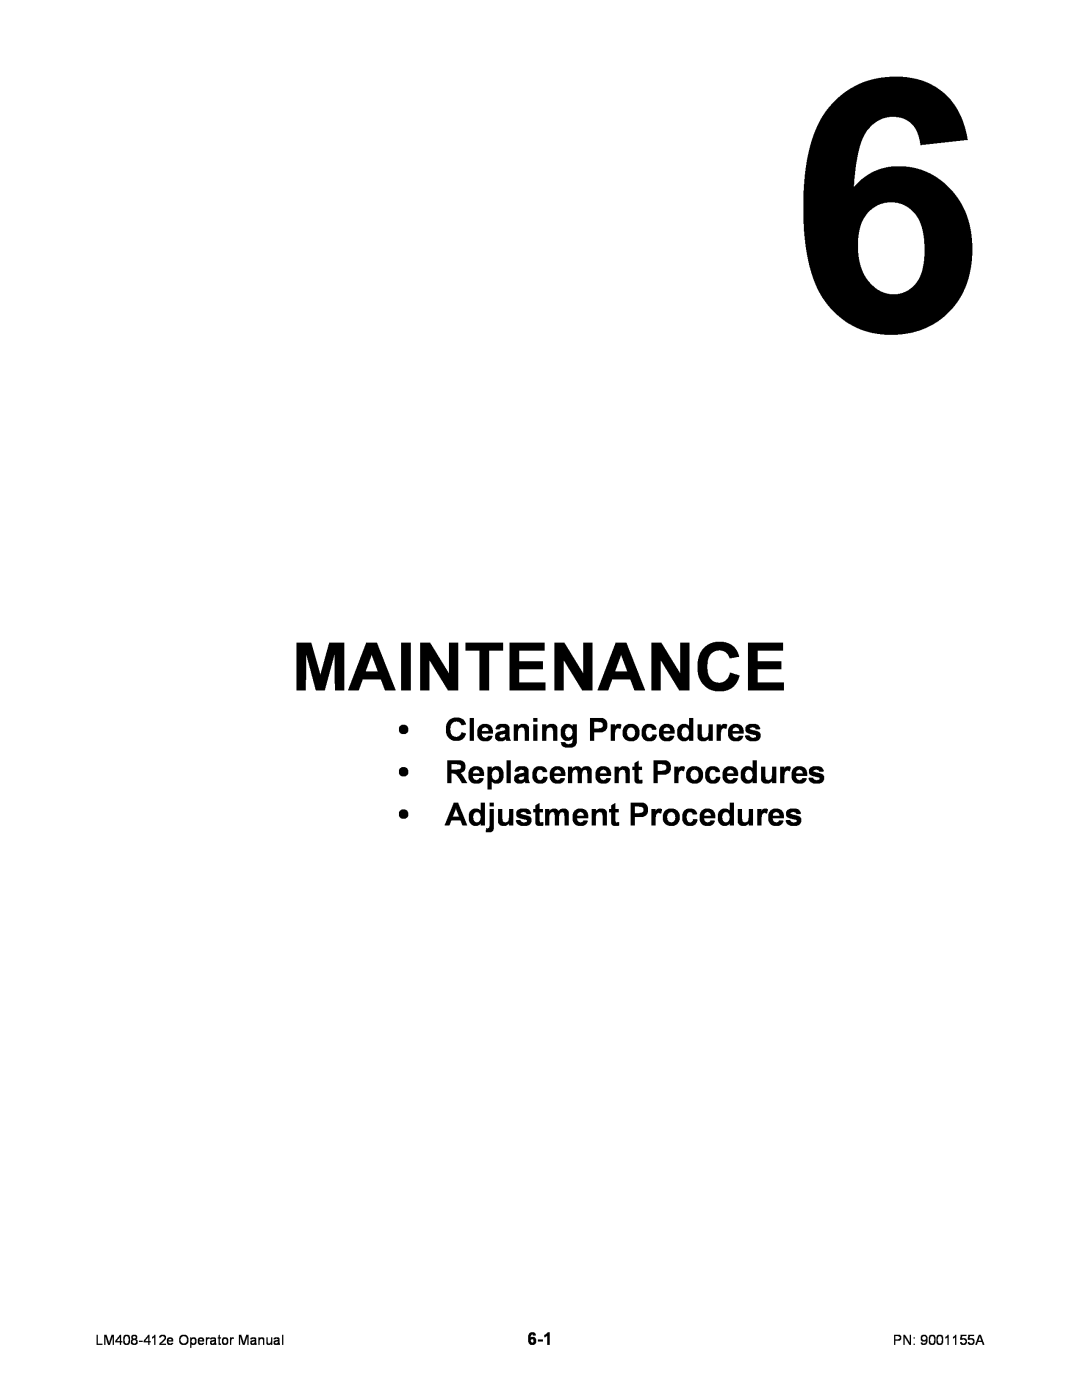 SATO LM408/412E manual Maintenance, Cleaning Procedures Replacement Procedures Adjustment Procedures 